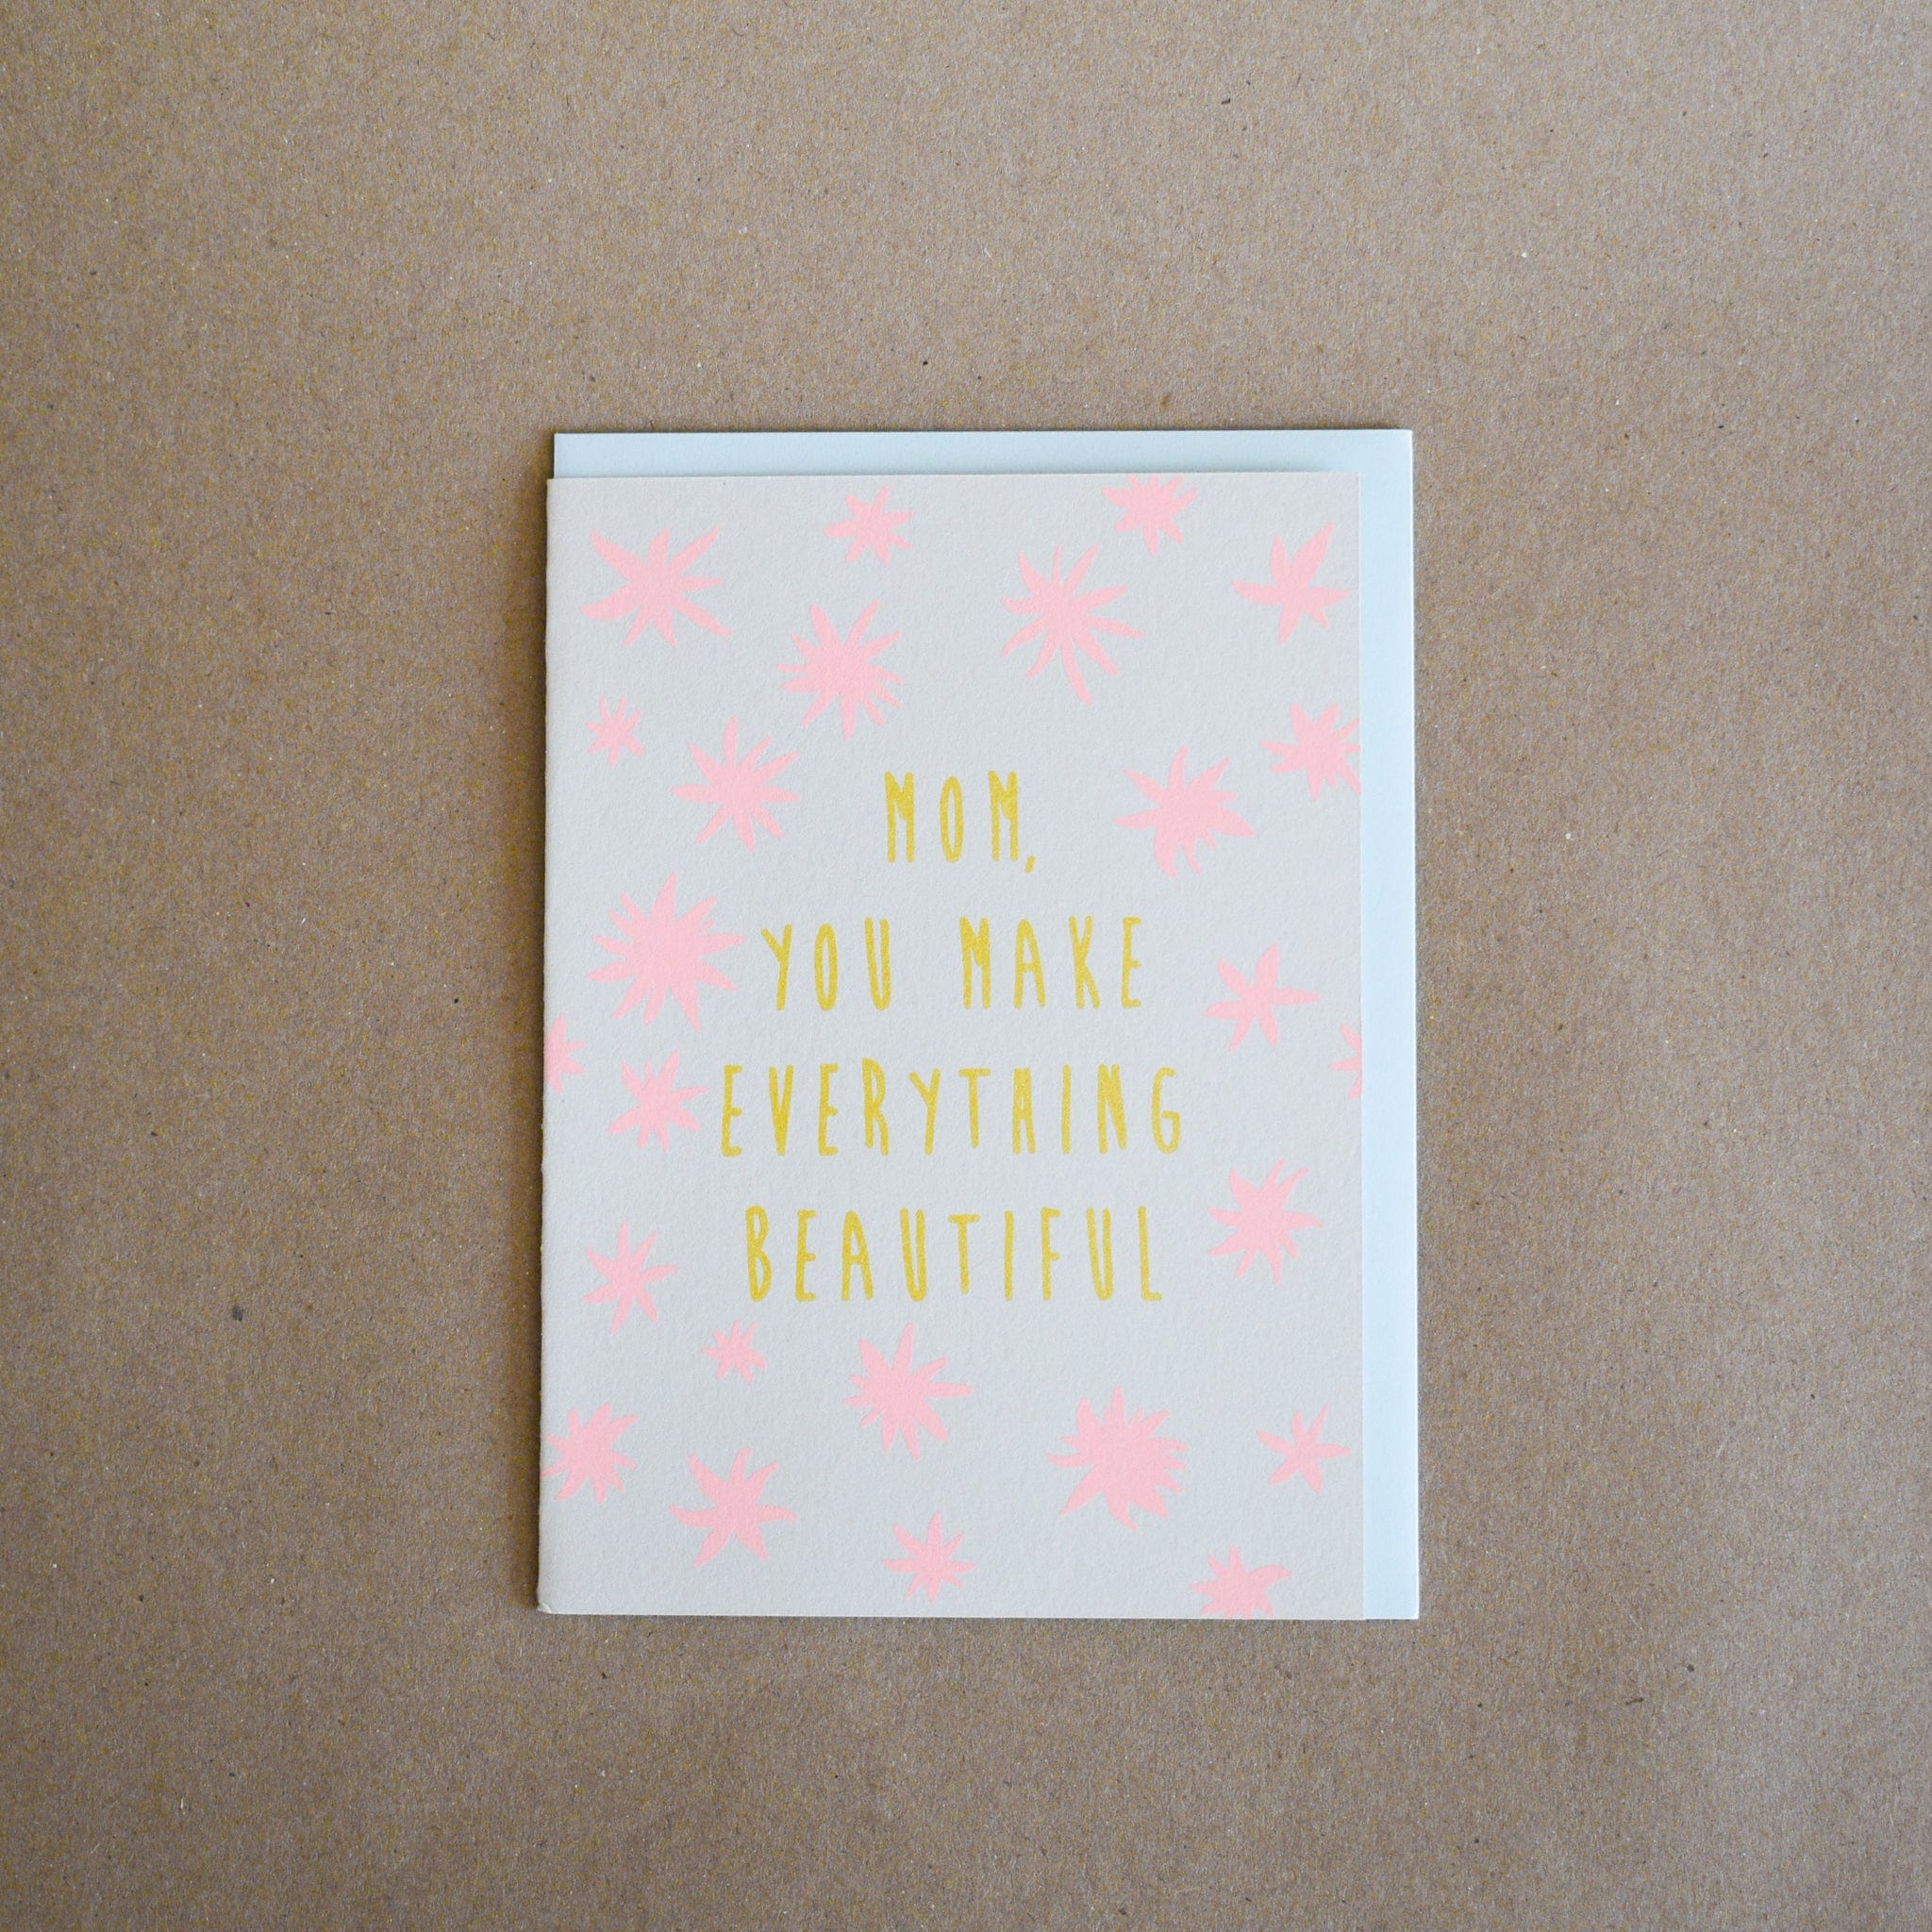 GOLD TEETH BROOKLYN Stationery Mom, You Make Everything More Beautiful Card